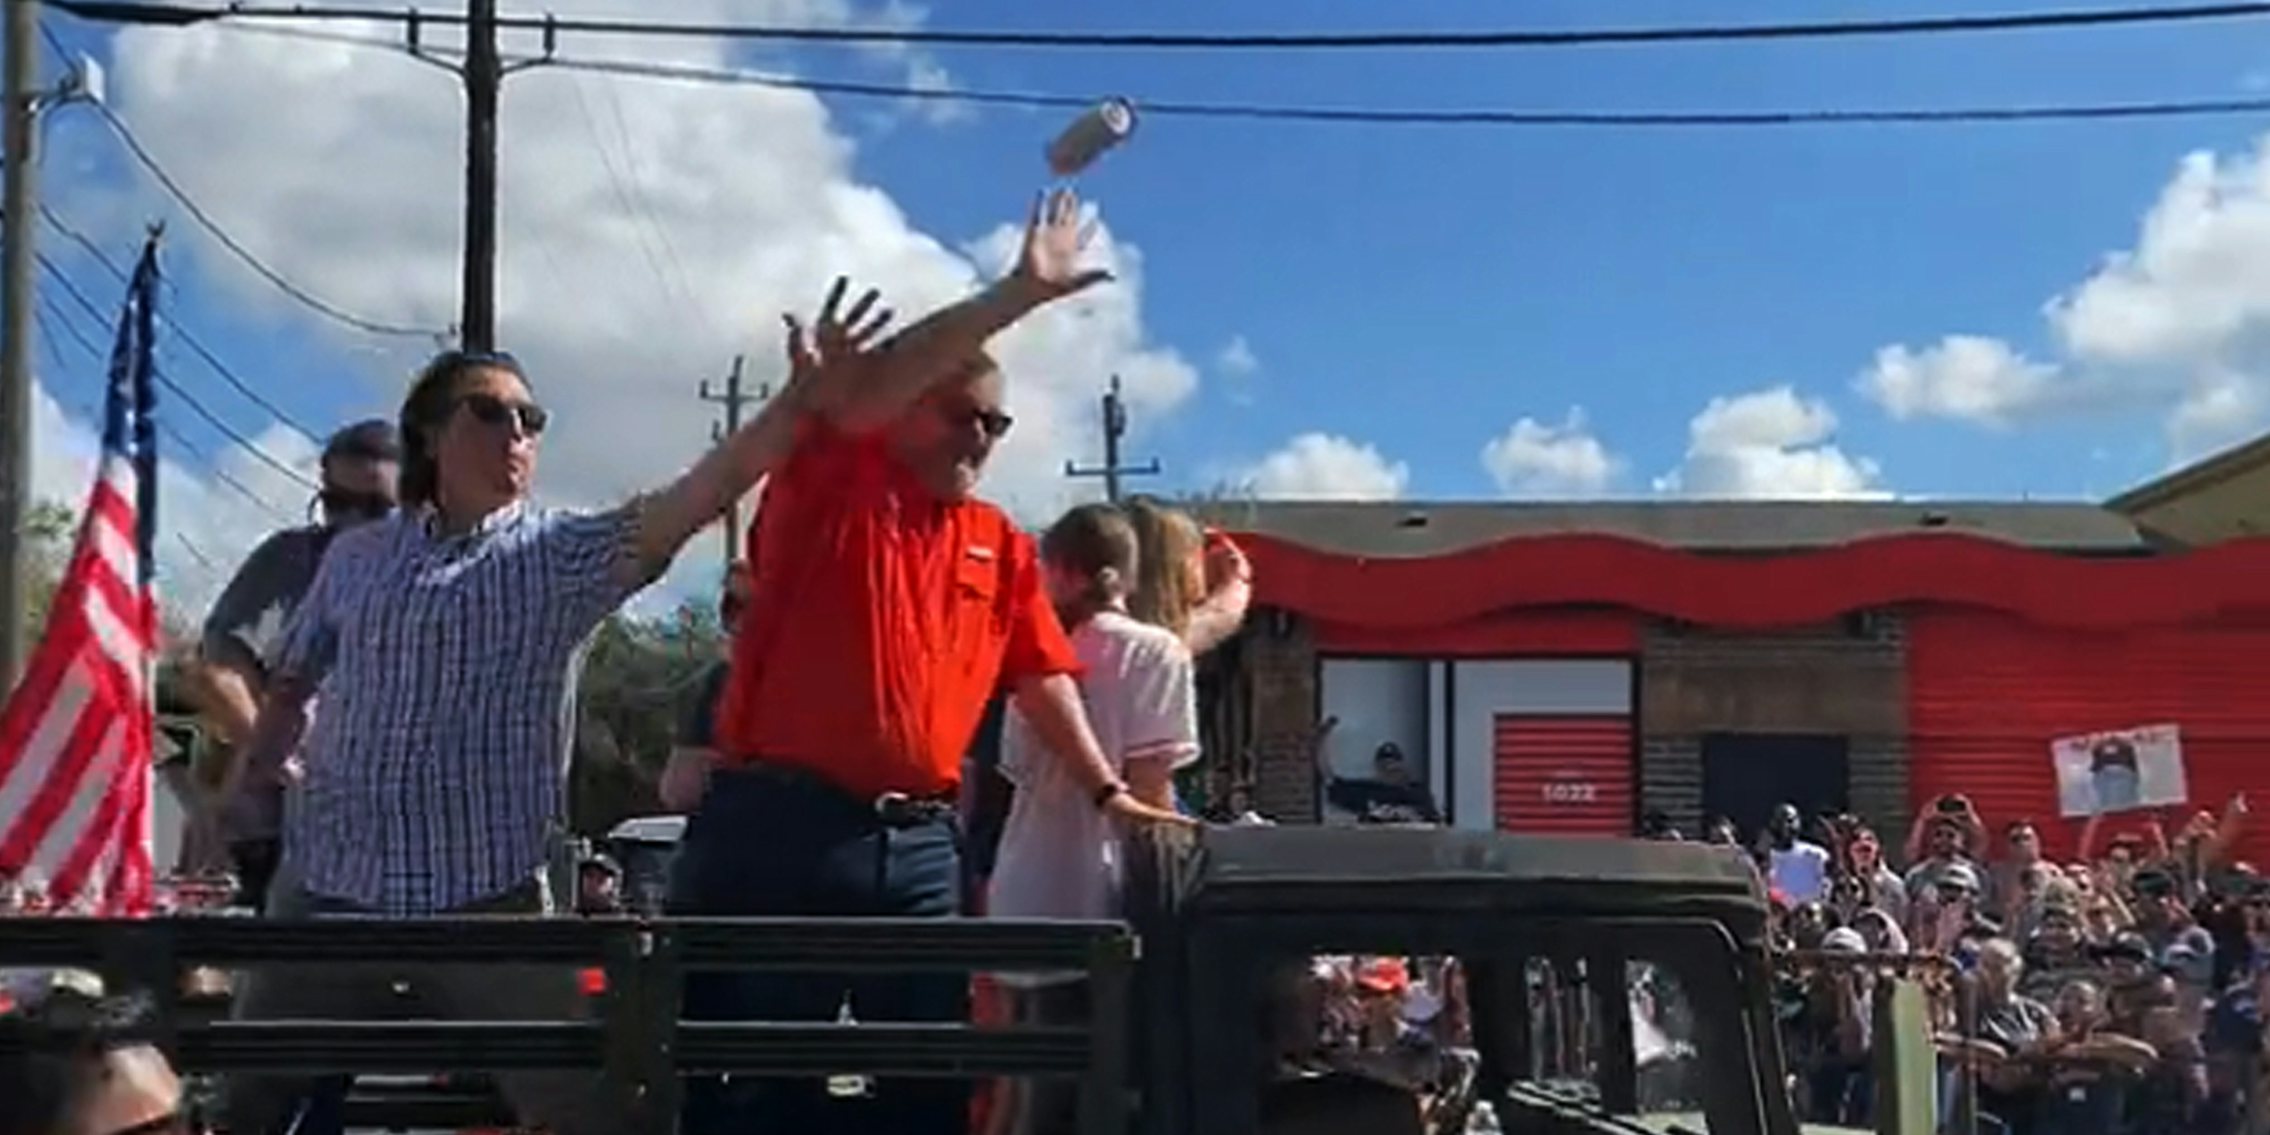 Beer flies at Ted Cruz during Astros World Series Parade